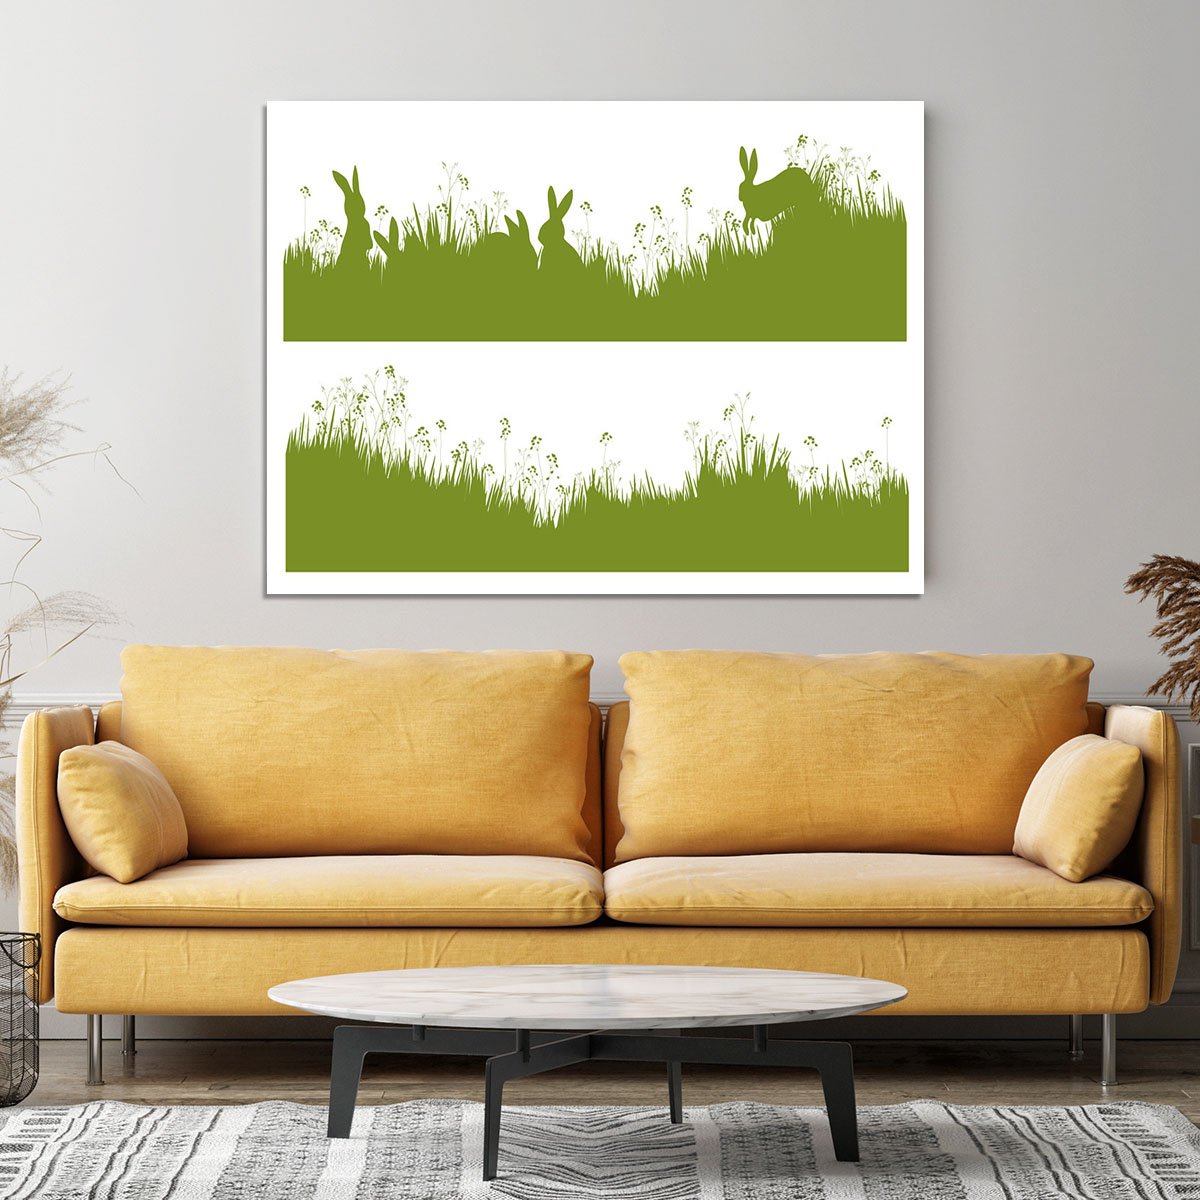 Vector silhouette rabbits in grass background Canvas Print or Poster